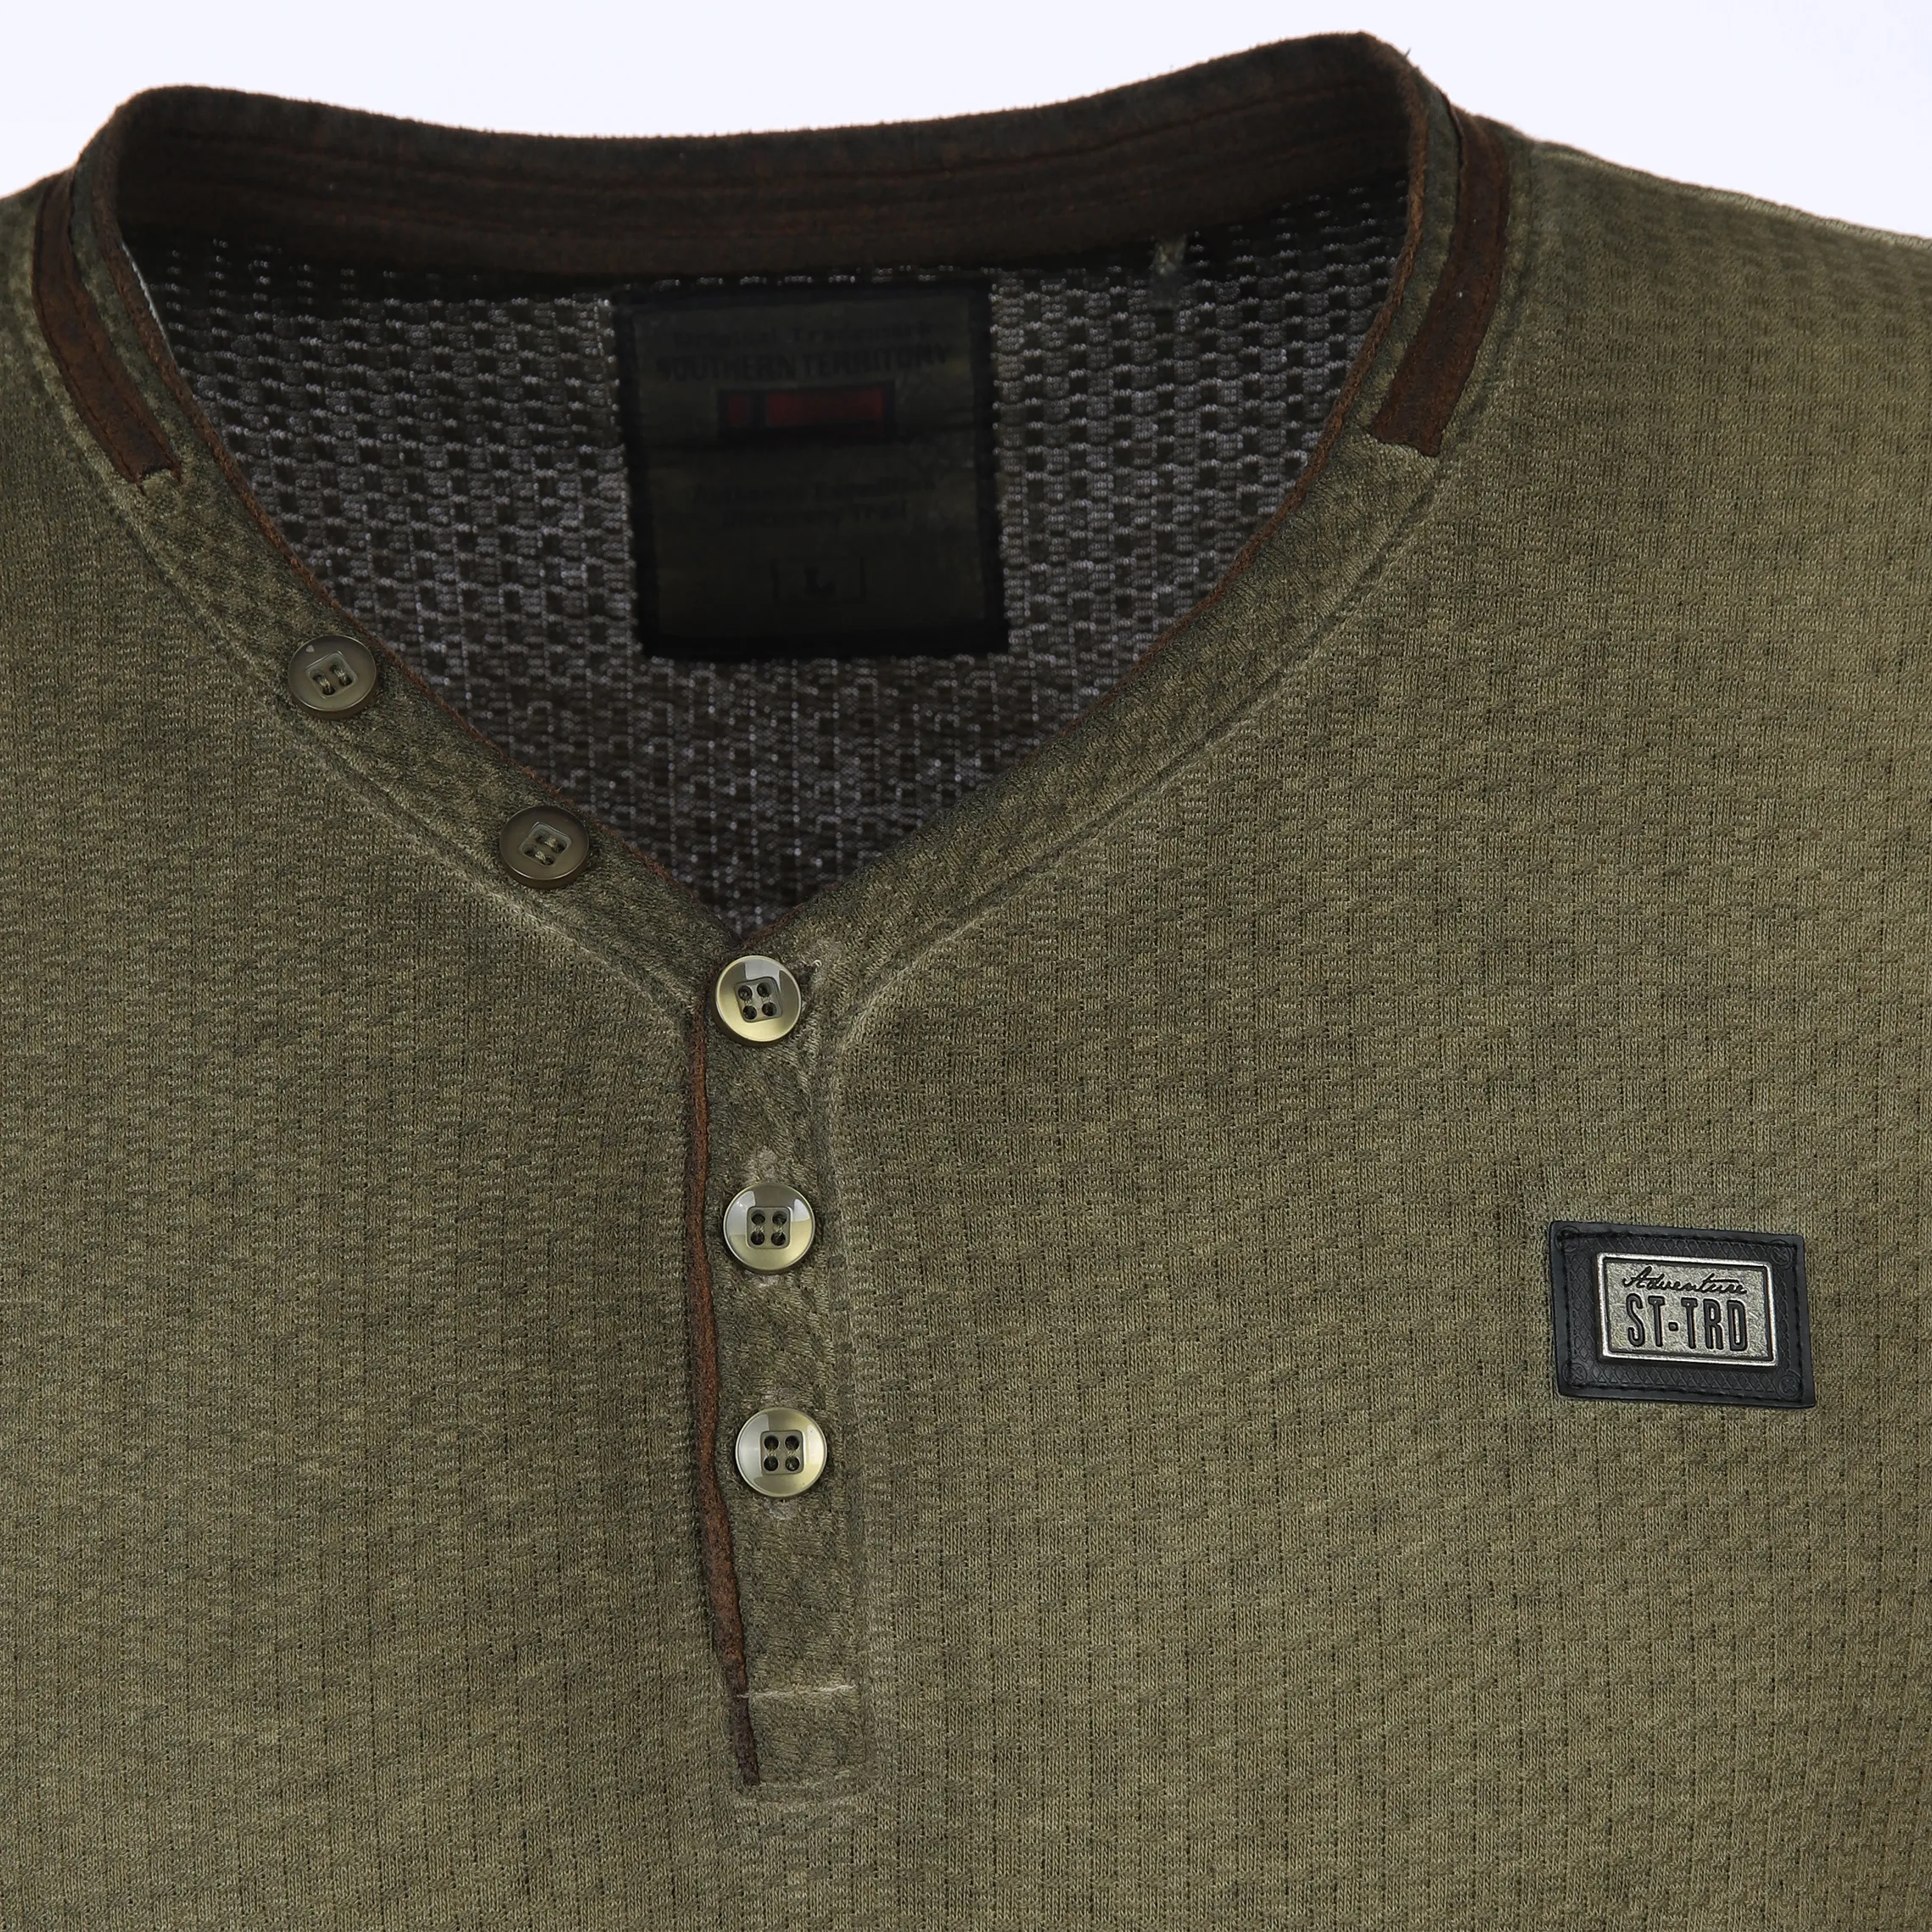 Southern Territory He. Henleyshirt 1/2 Arm suede 2in1 Oliv 886498 OLIVE 3